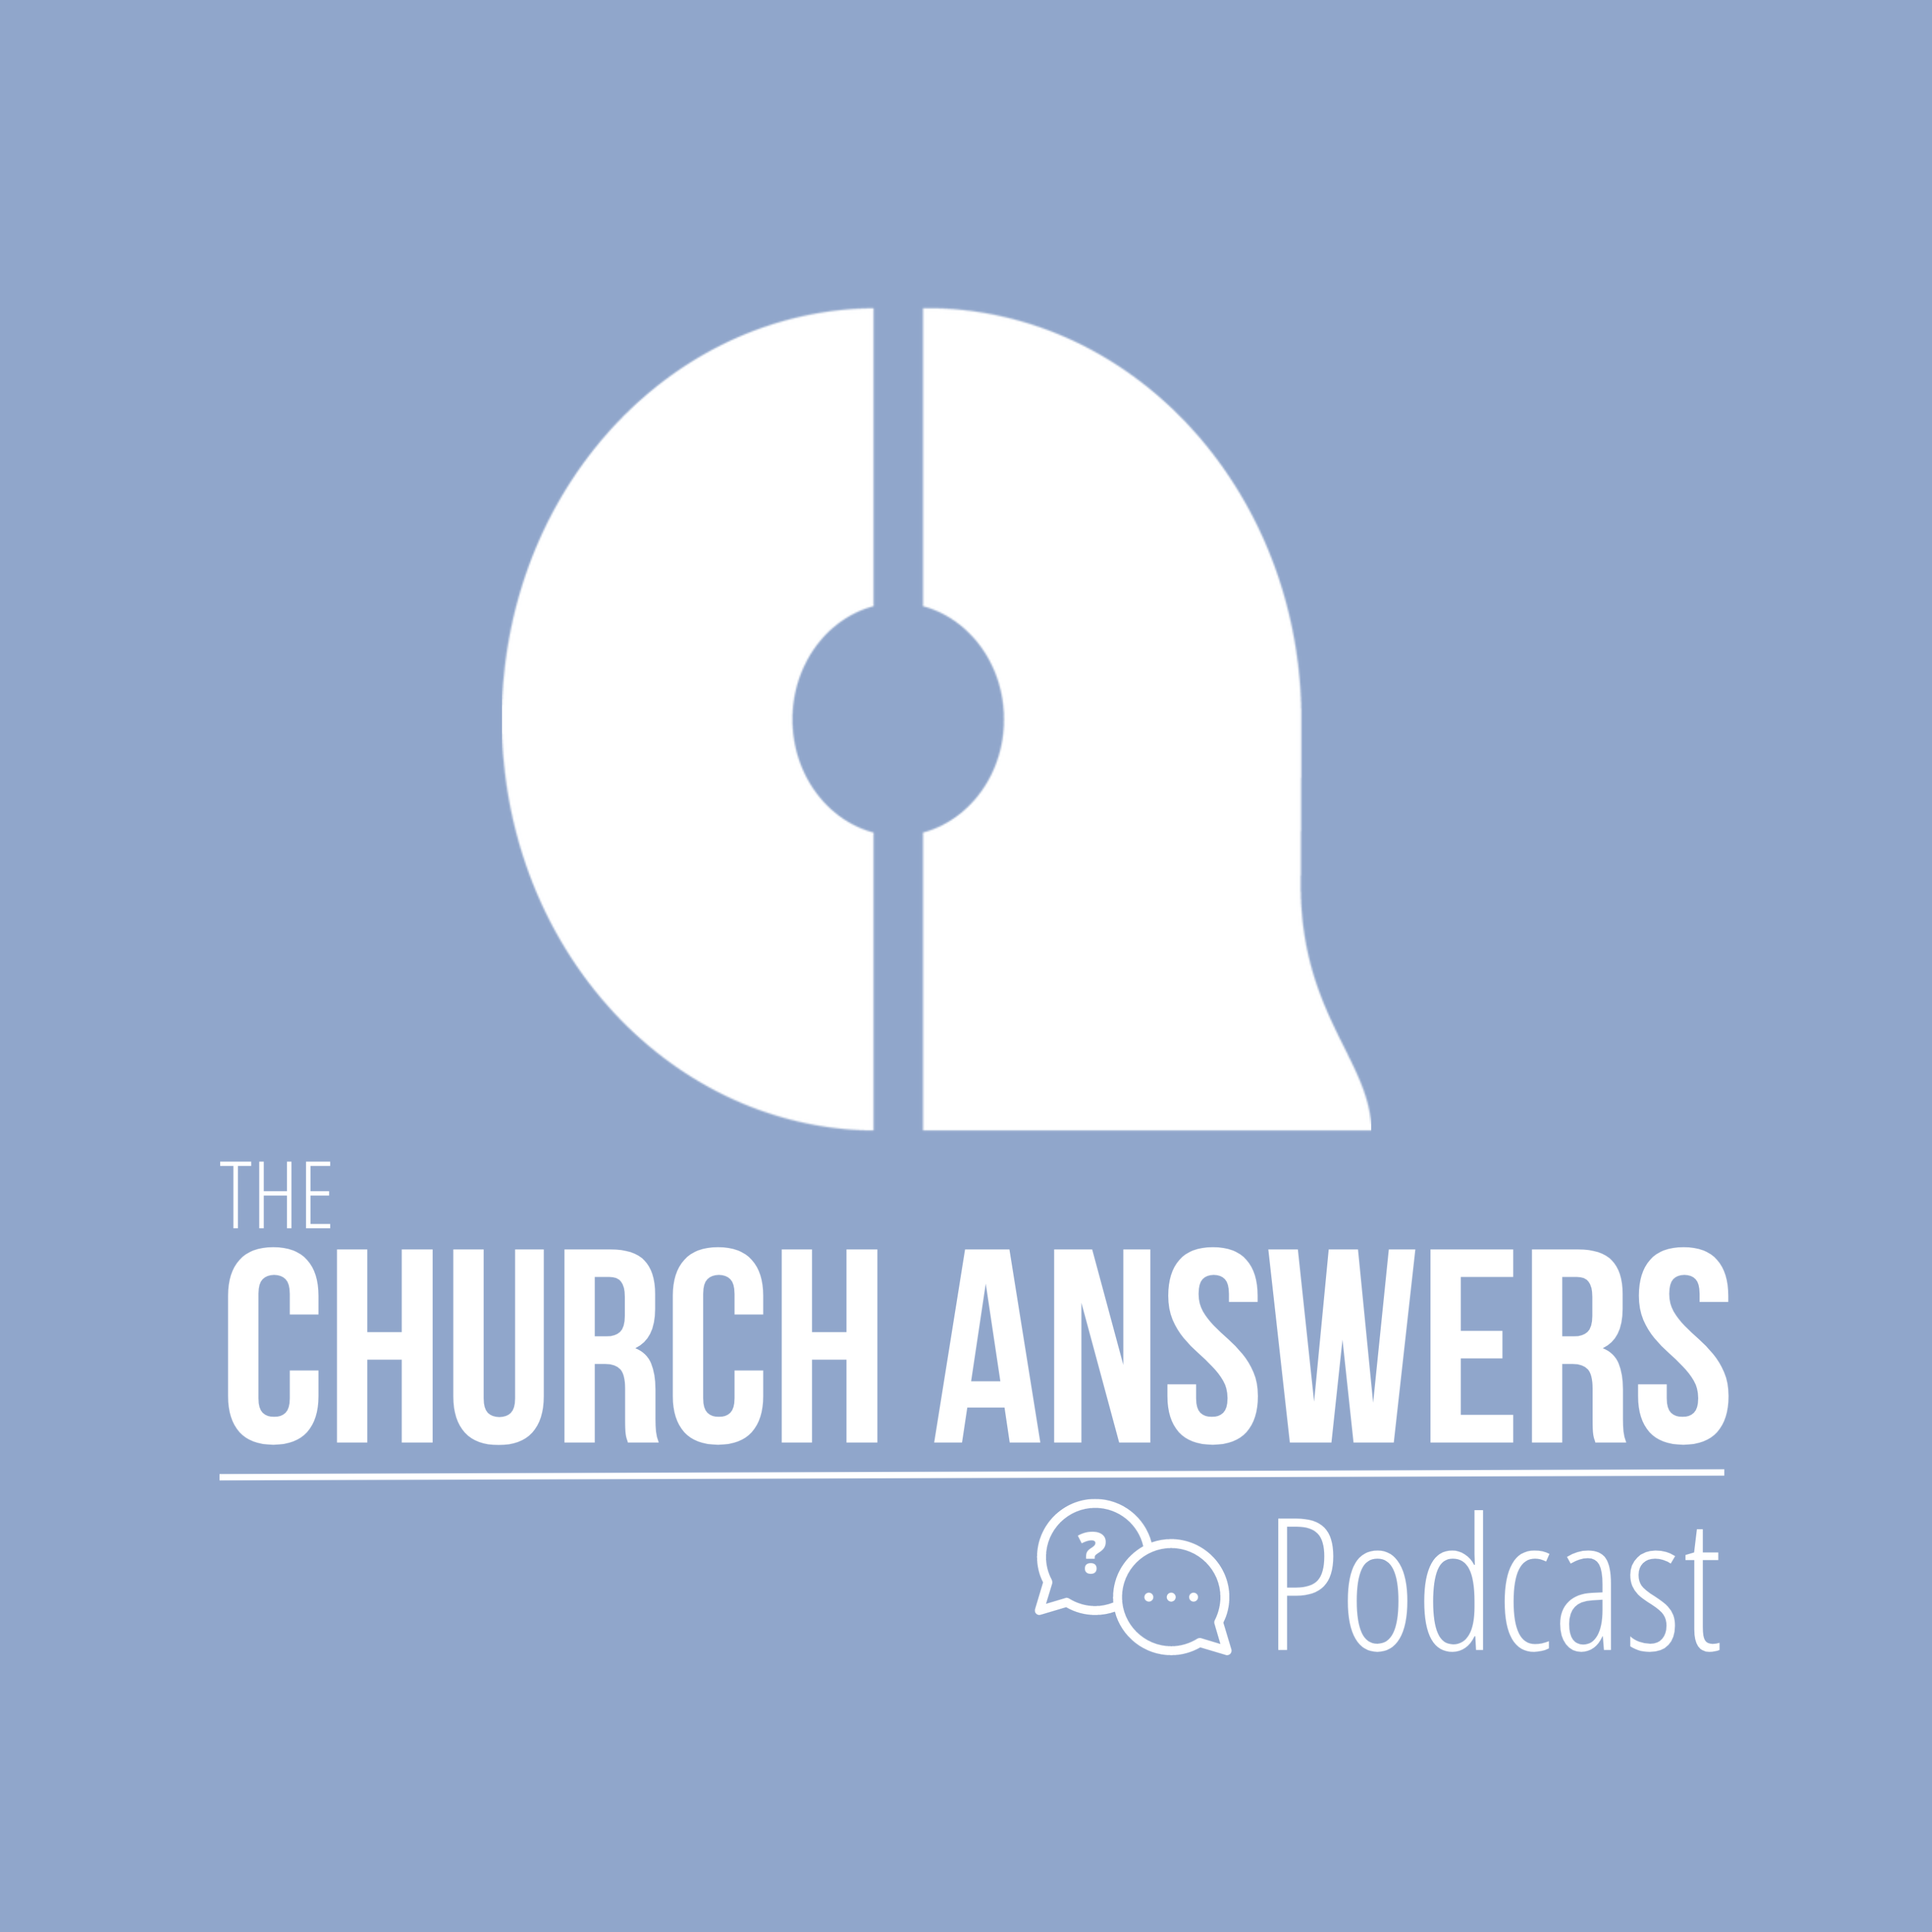 The Church Answers Podcast